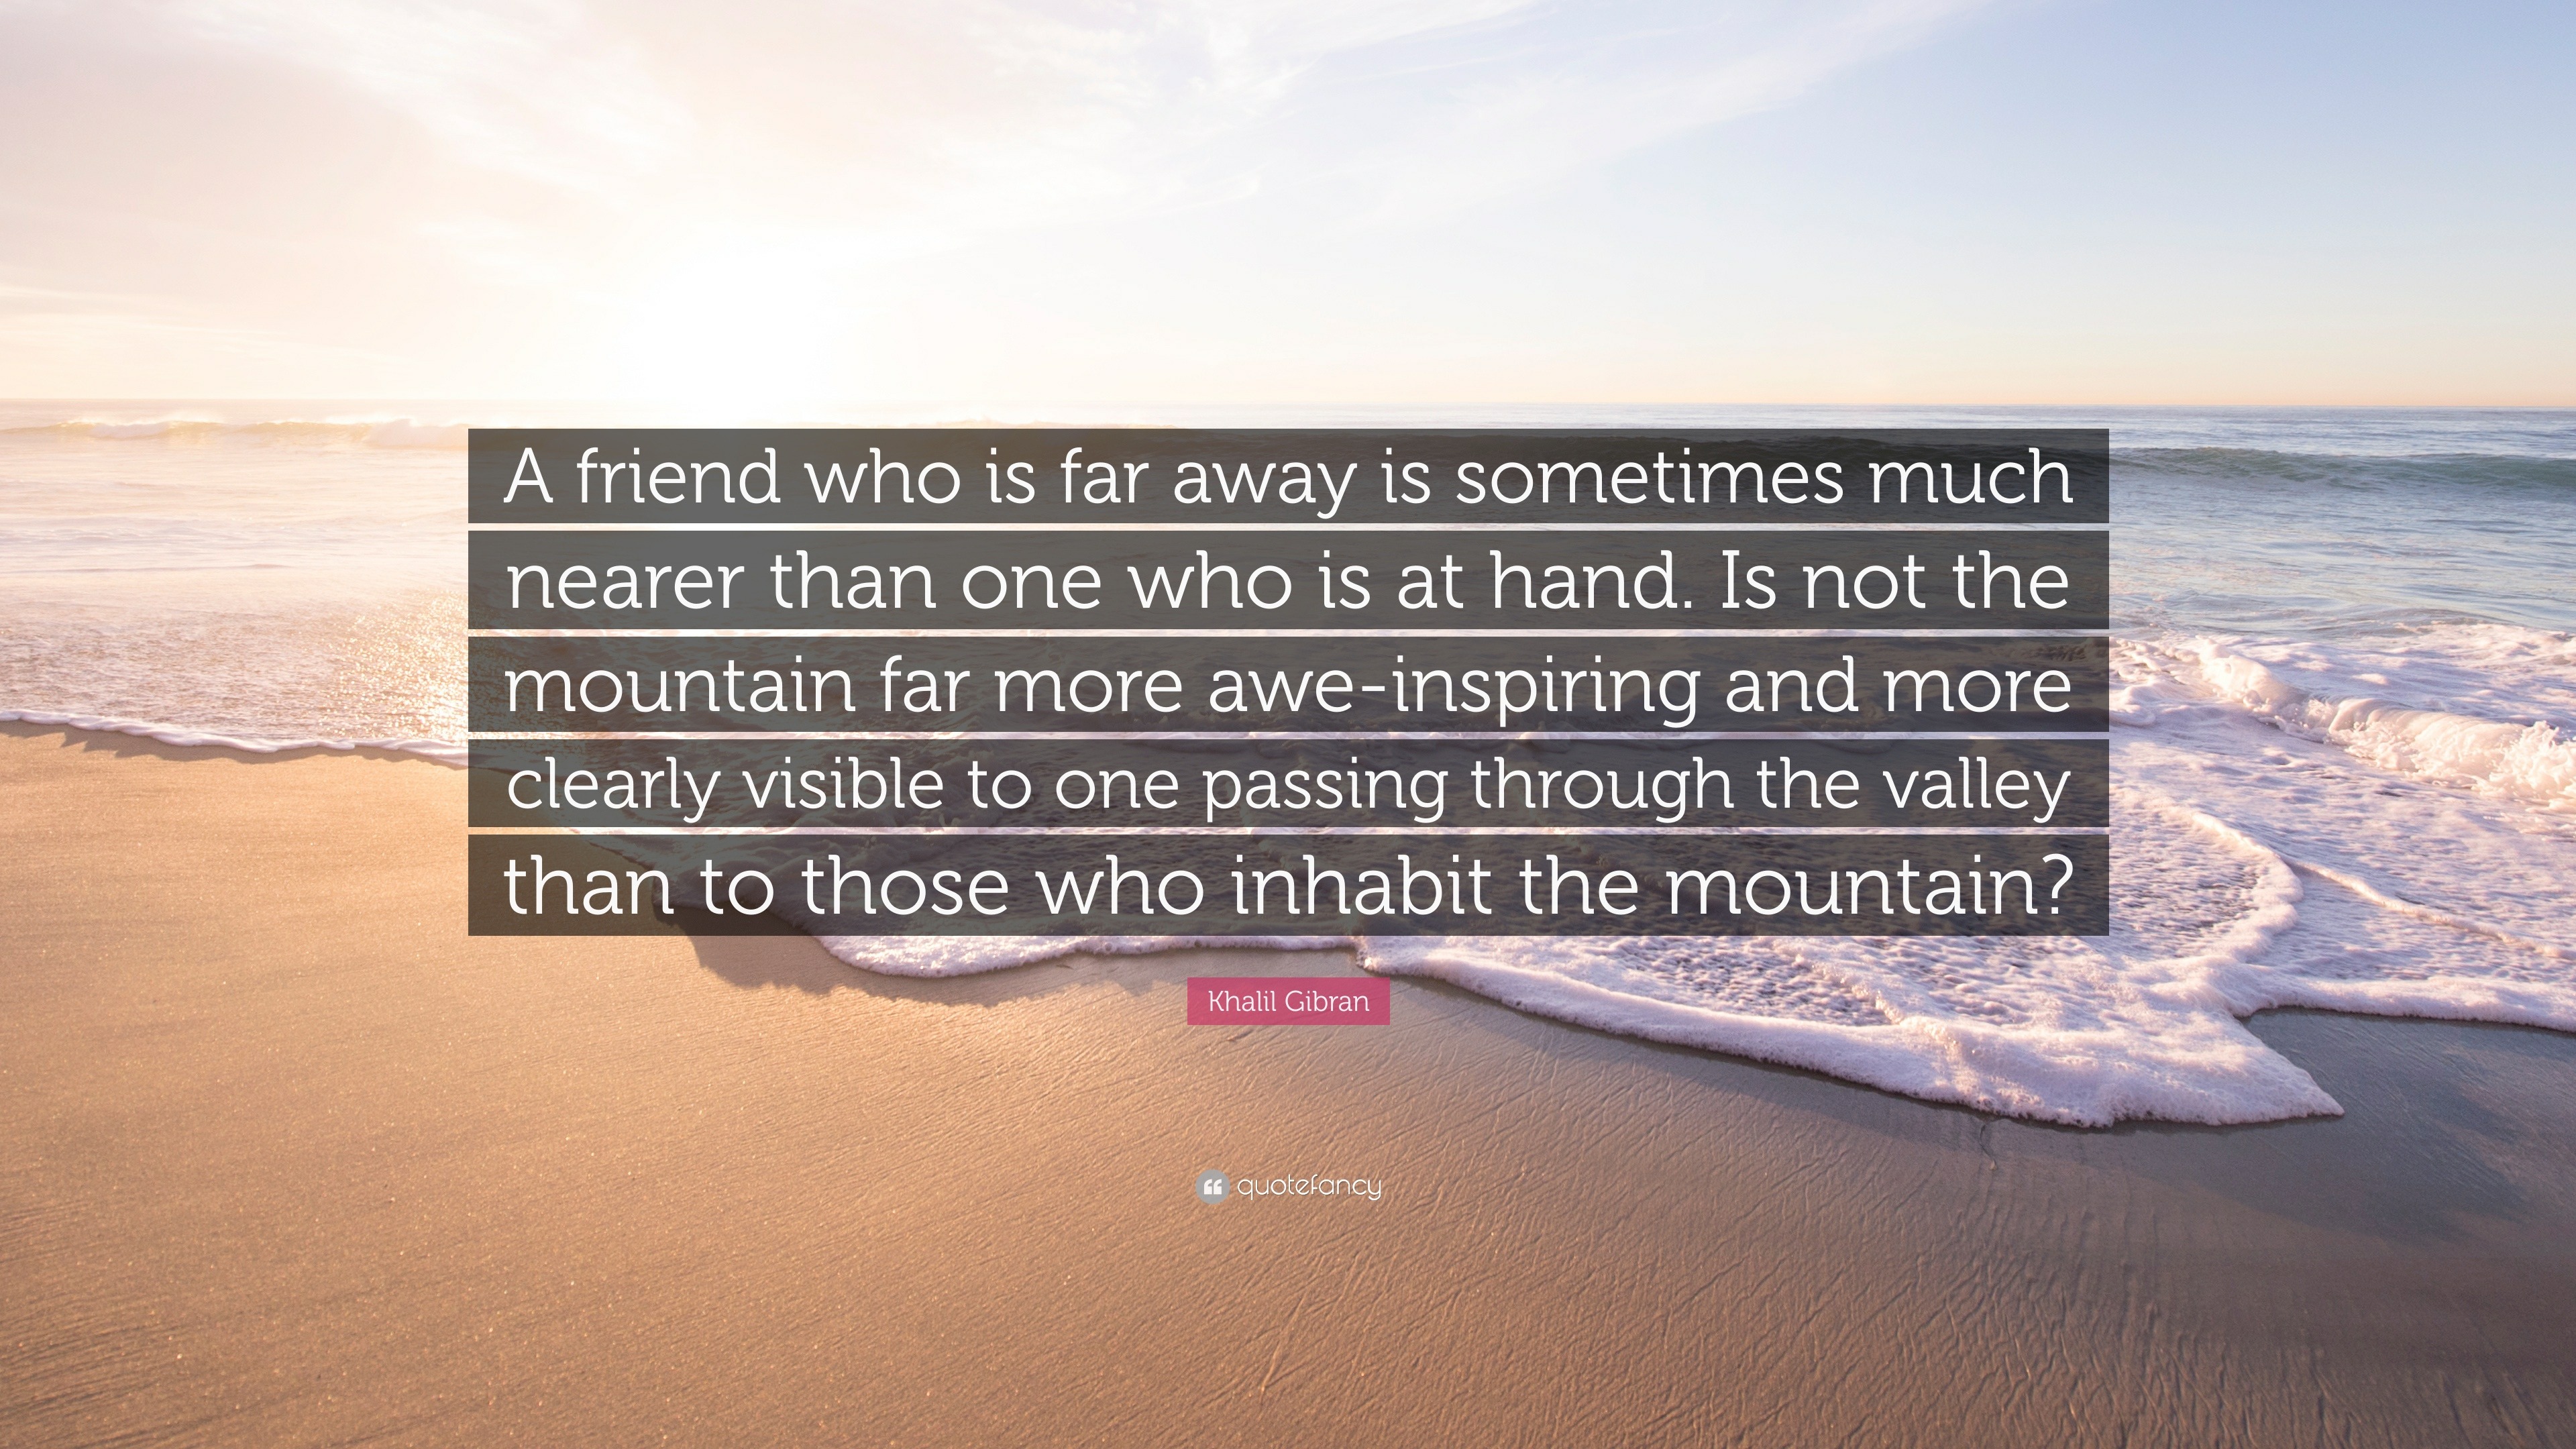 Khalil Gibran Quote: “A friend who is far away is sometimes much nearer